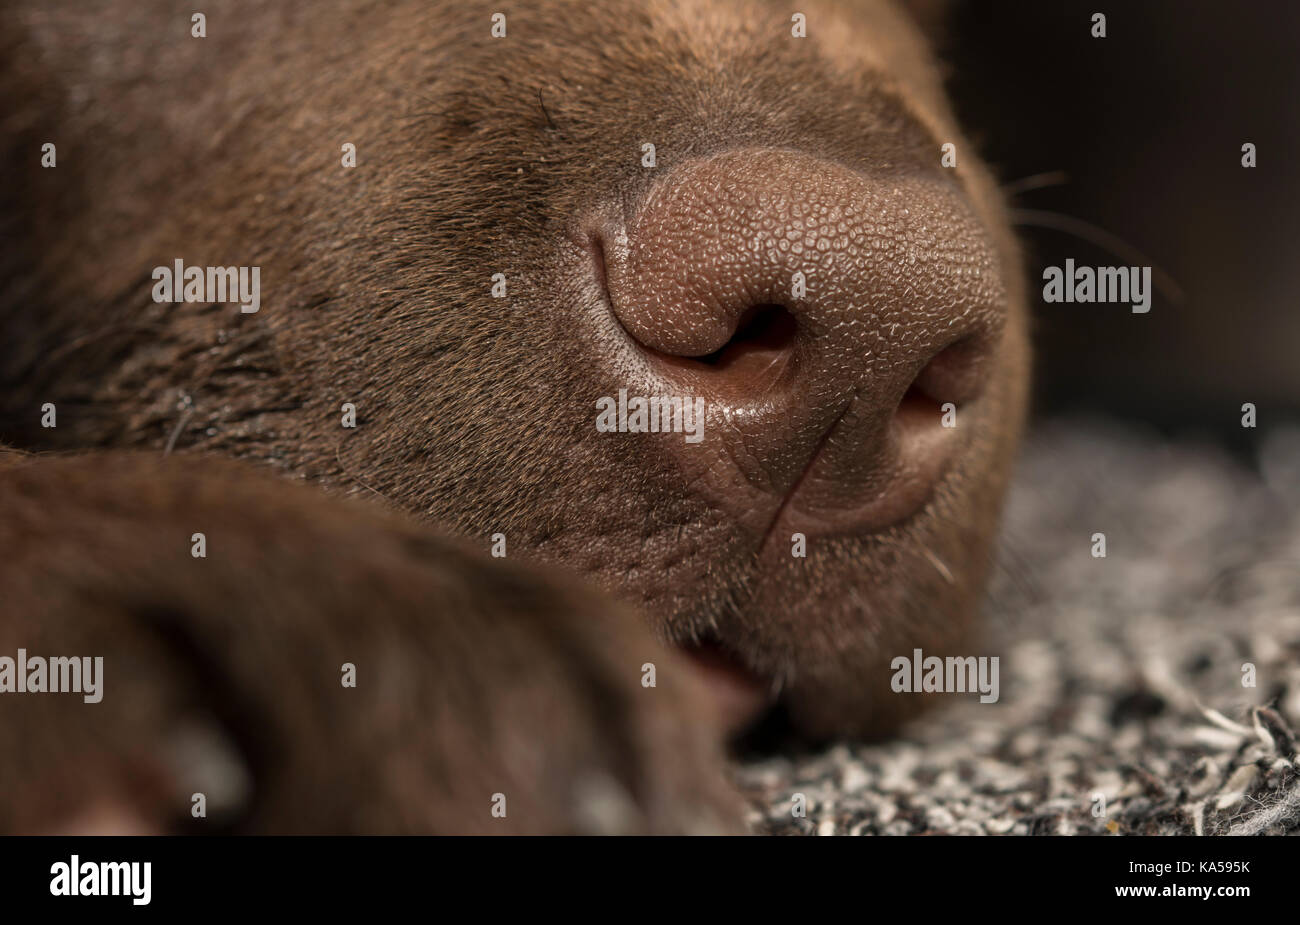 Closeup view on the snout of a 3-month-old Chocolate Labrador puppy Stock Photo